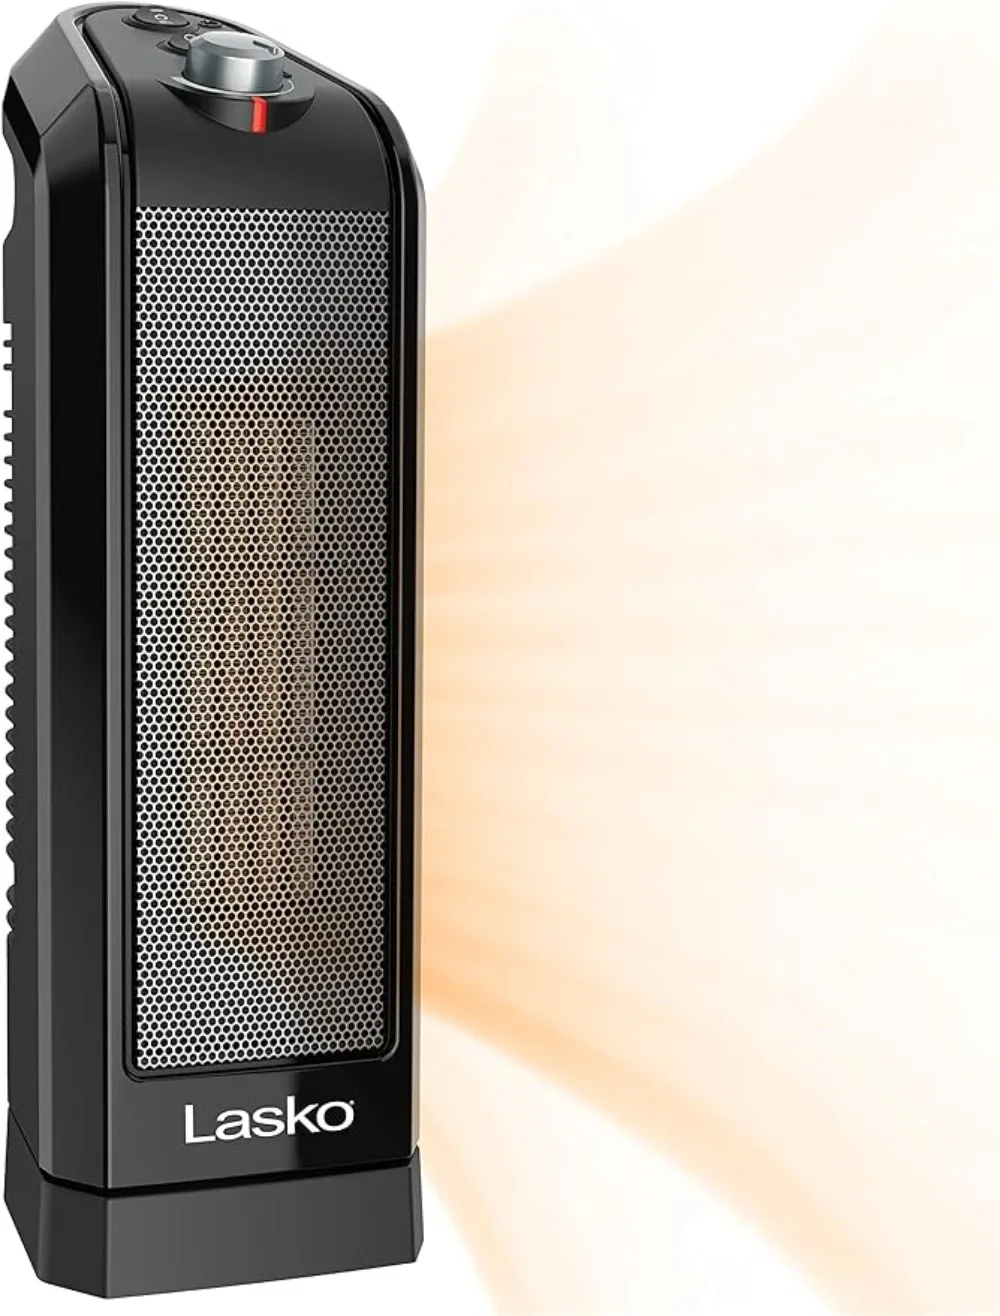 

Lasko Oscillating Ceramic Space Heater for Home with Overheat Protection, Thermostat, and 3 Speeds, 15.7 Inches, Black